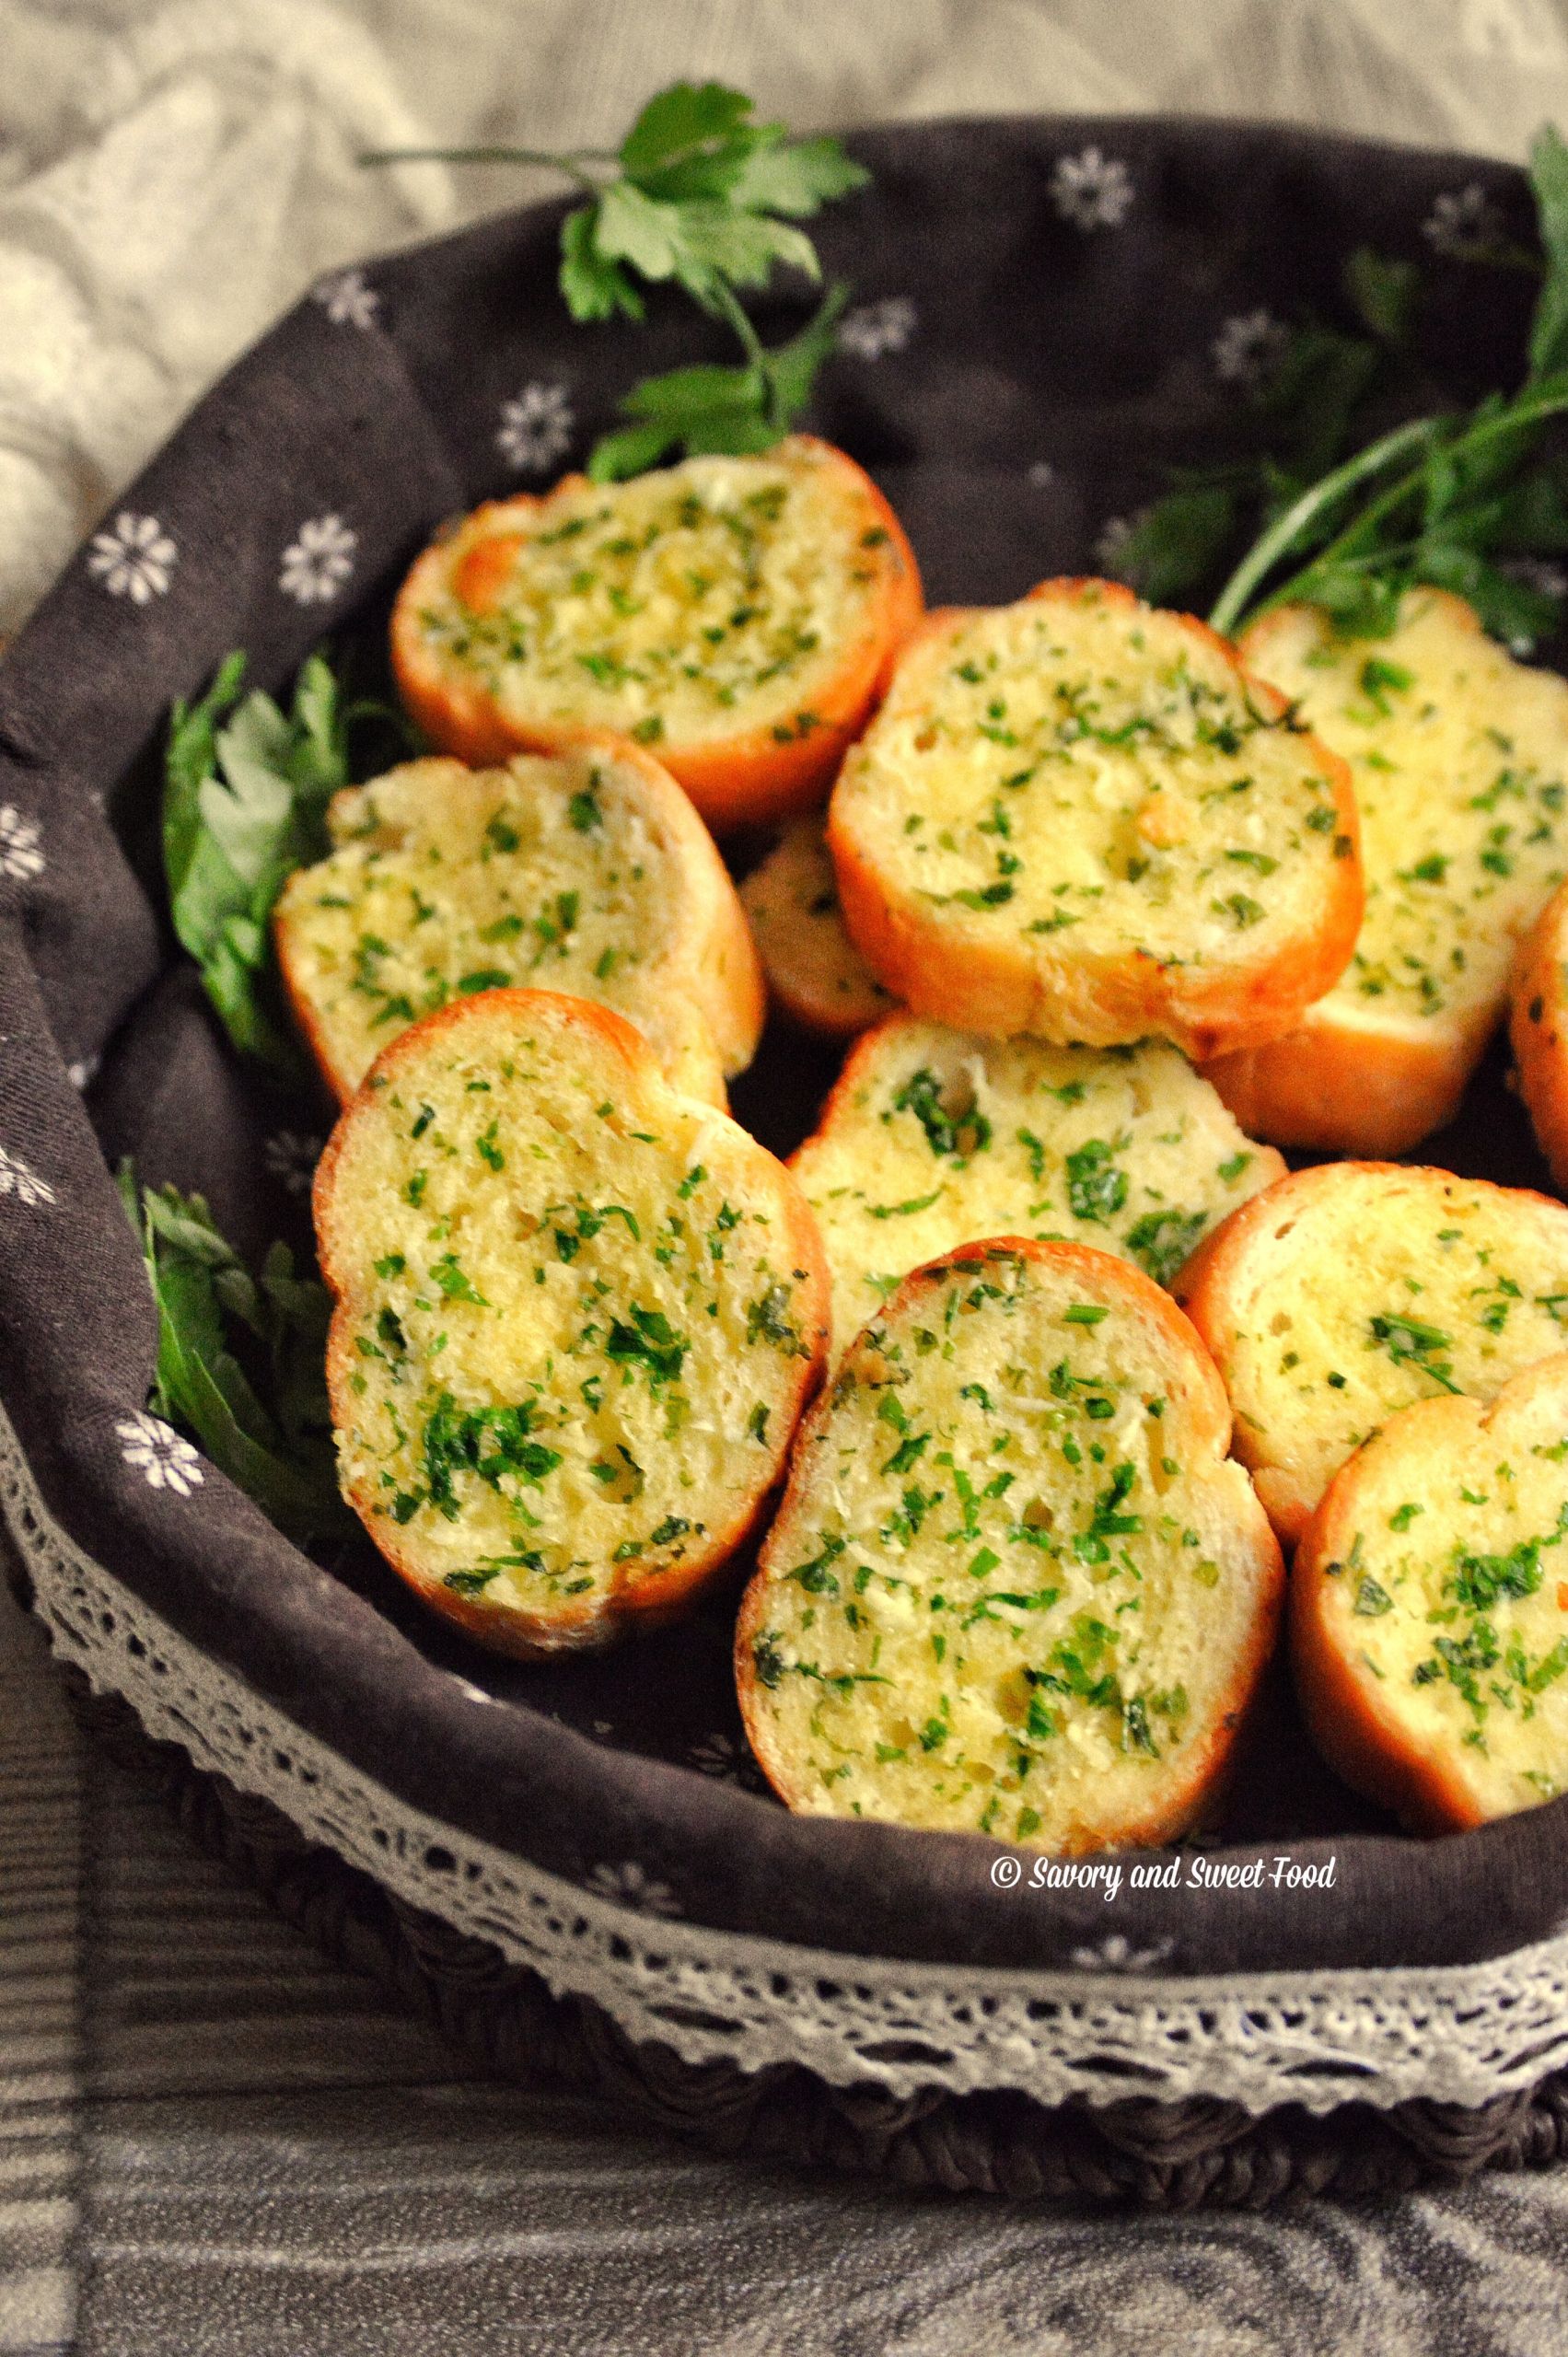 Main Dish With Garlic Bread
 Garlic Bread Without Cheese Savory&SweetFood